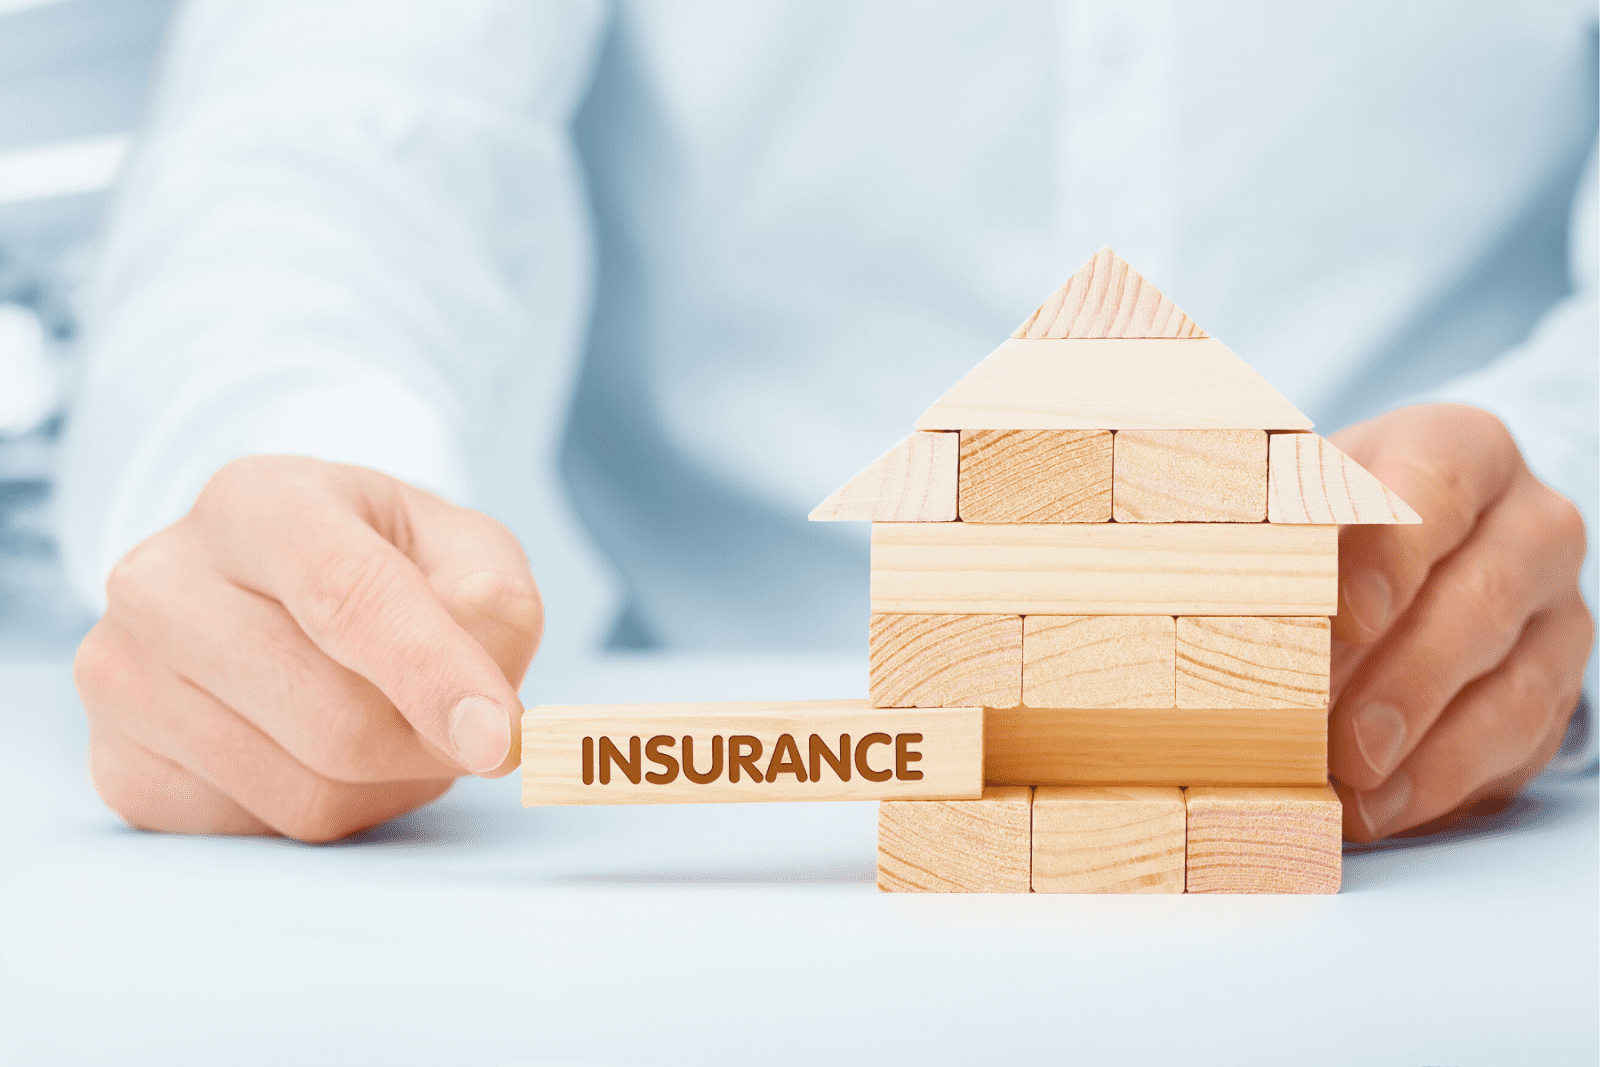 Close up of a small house made of wooden blocks with ‘insurance’ written on one